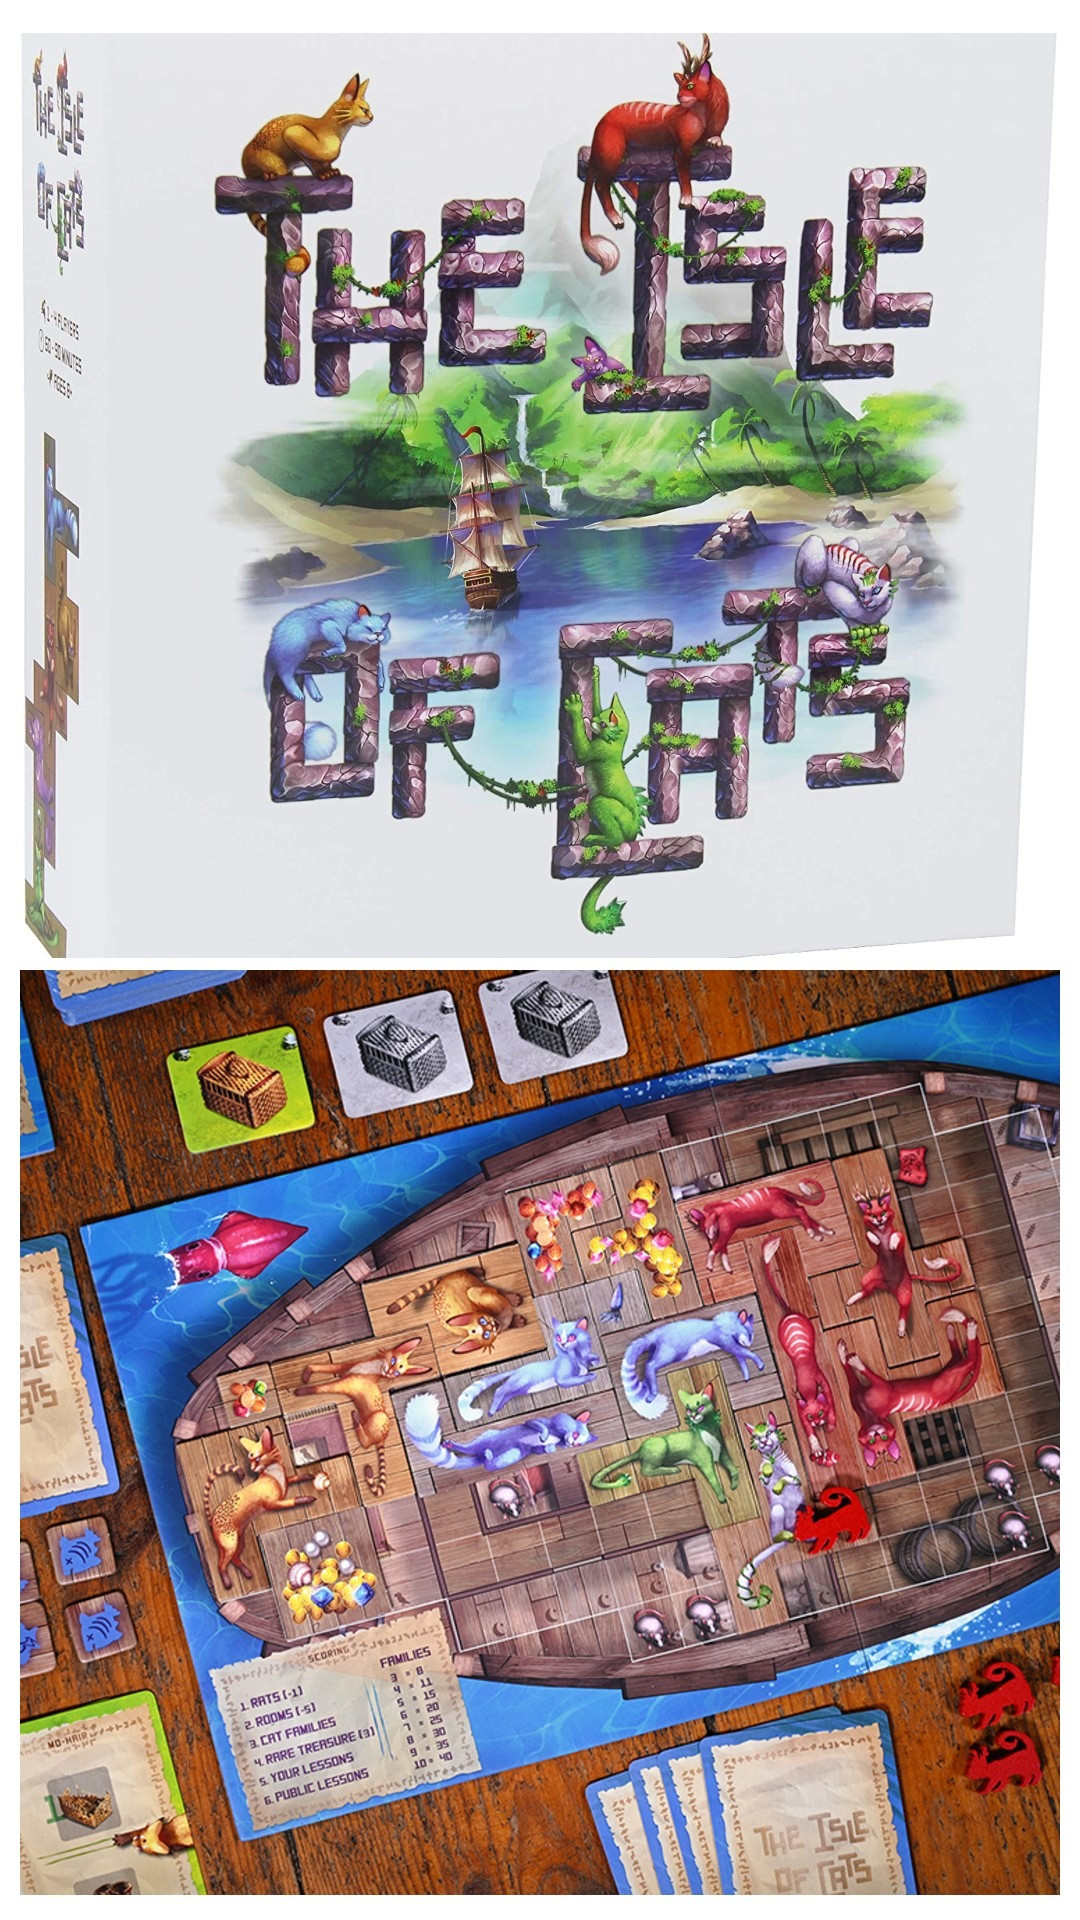 Isle of Cats Board Game - A competitive card-drafting polyomino cat-placement board game. 1-4 players/Ages 8+/Includes Solo & Family Mode)